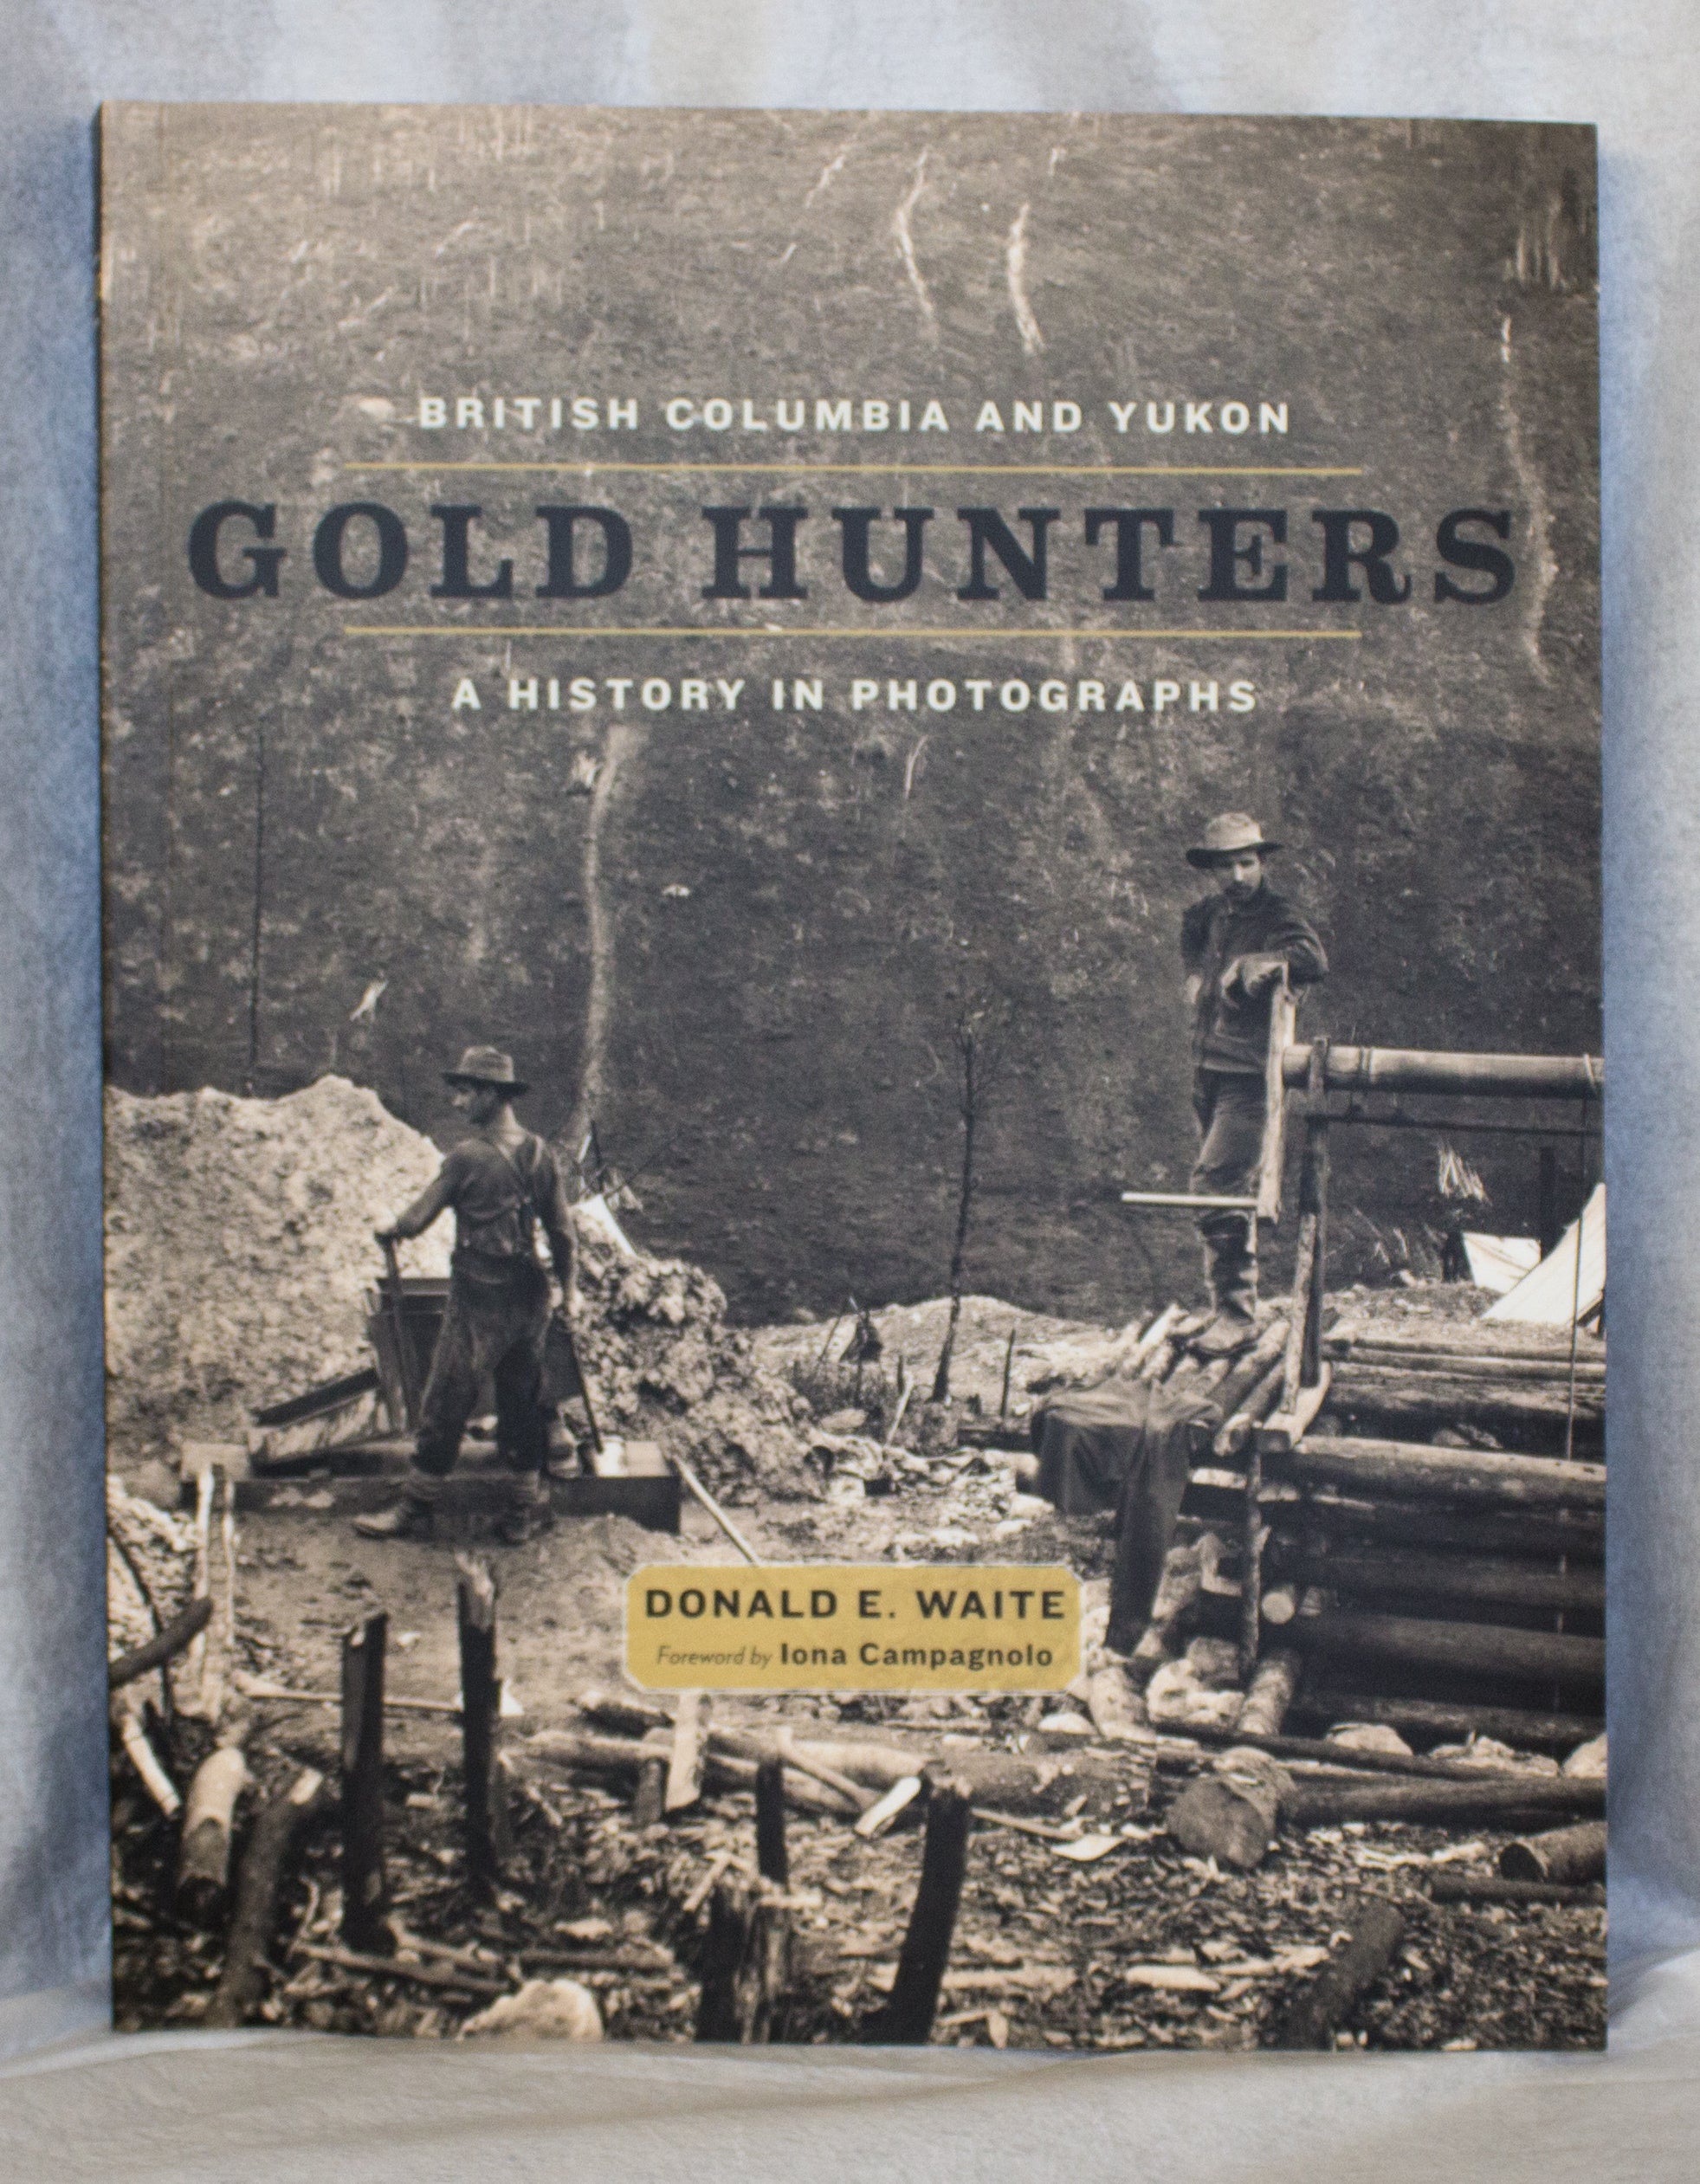 British Columbia and Yukon Gold Hunters (A History in Photographs)